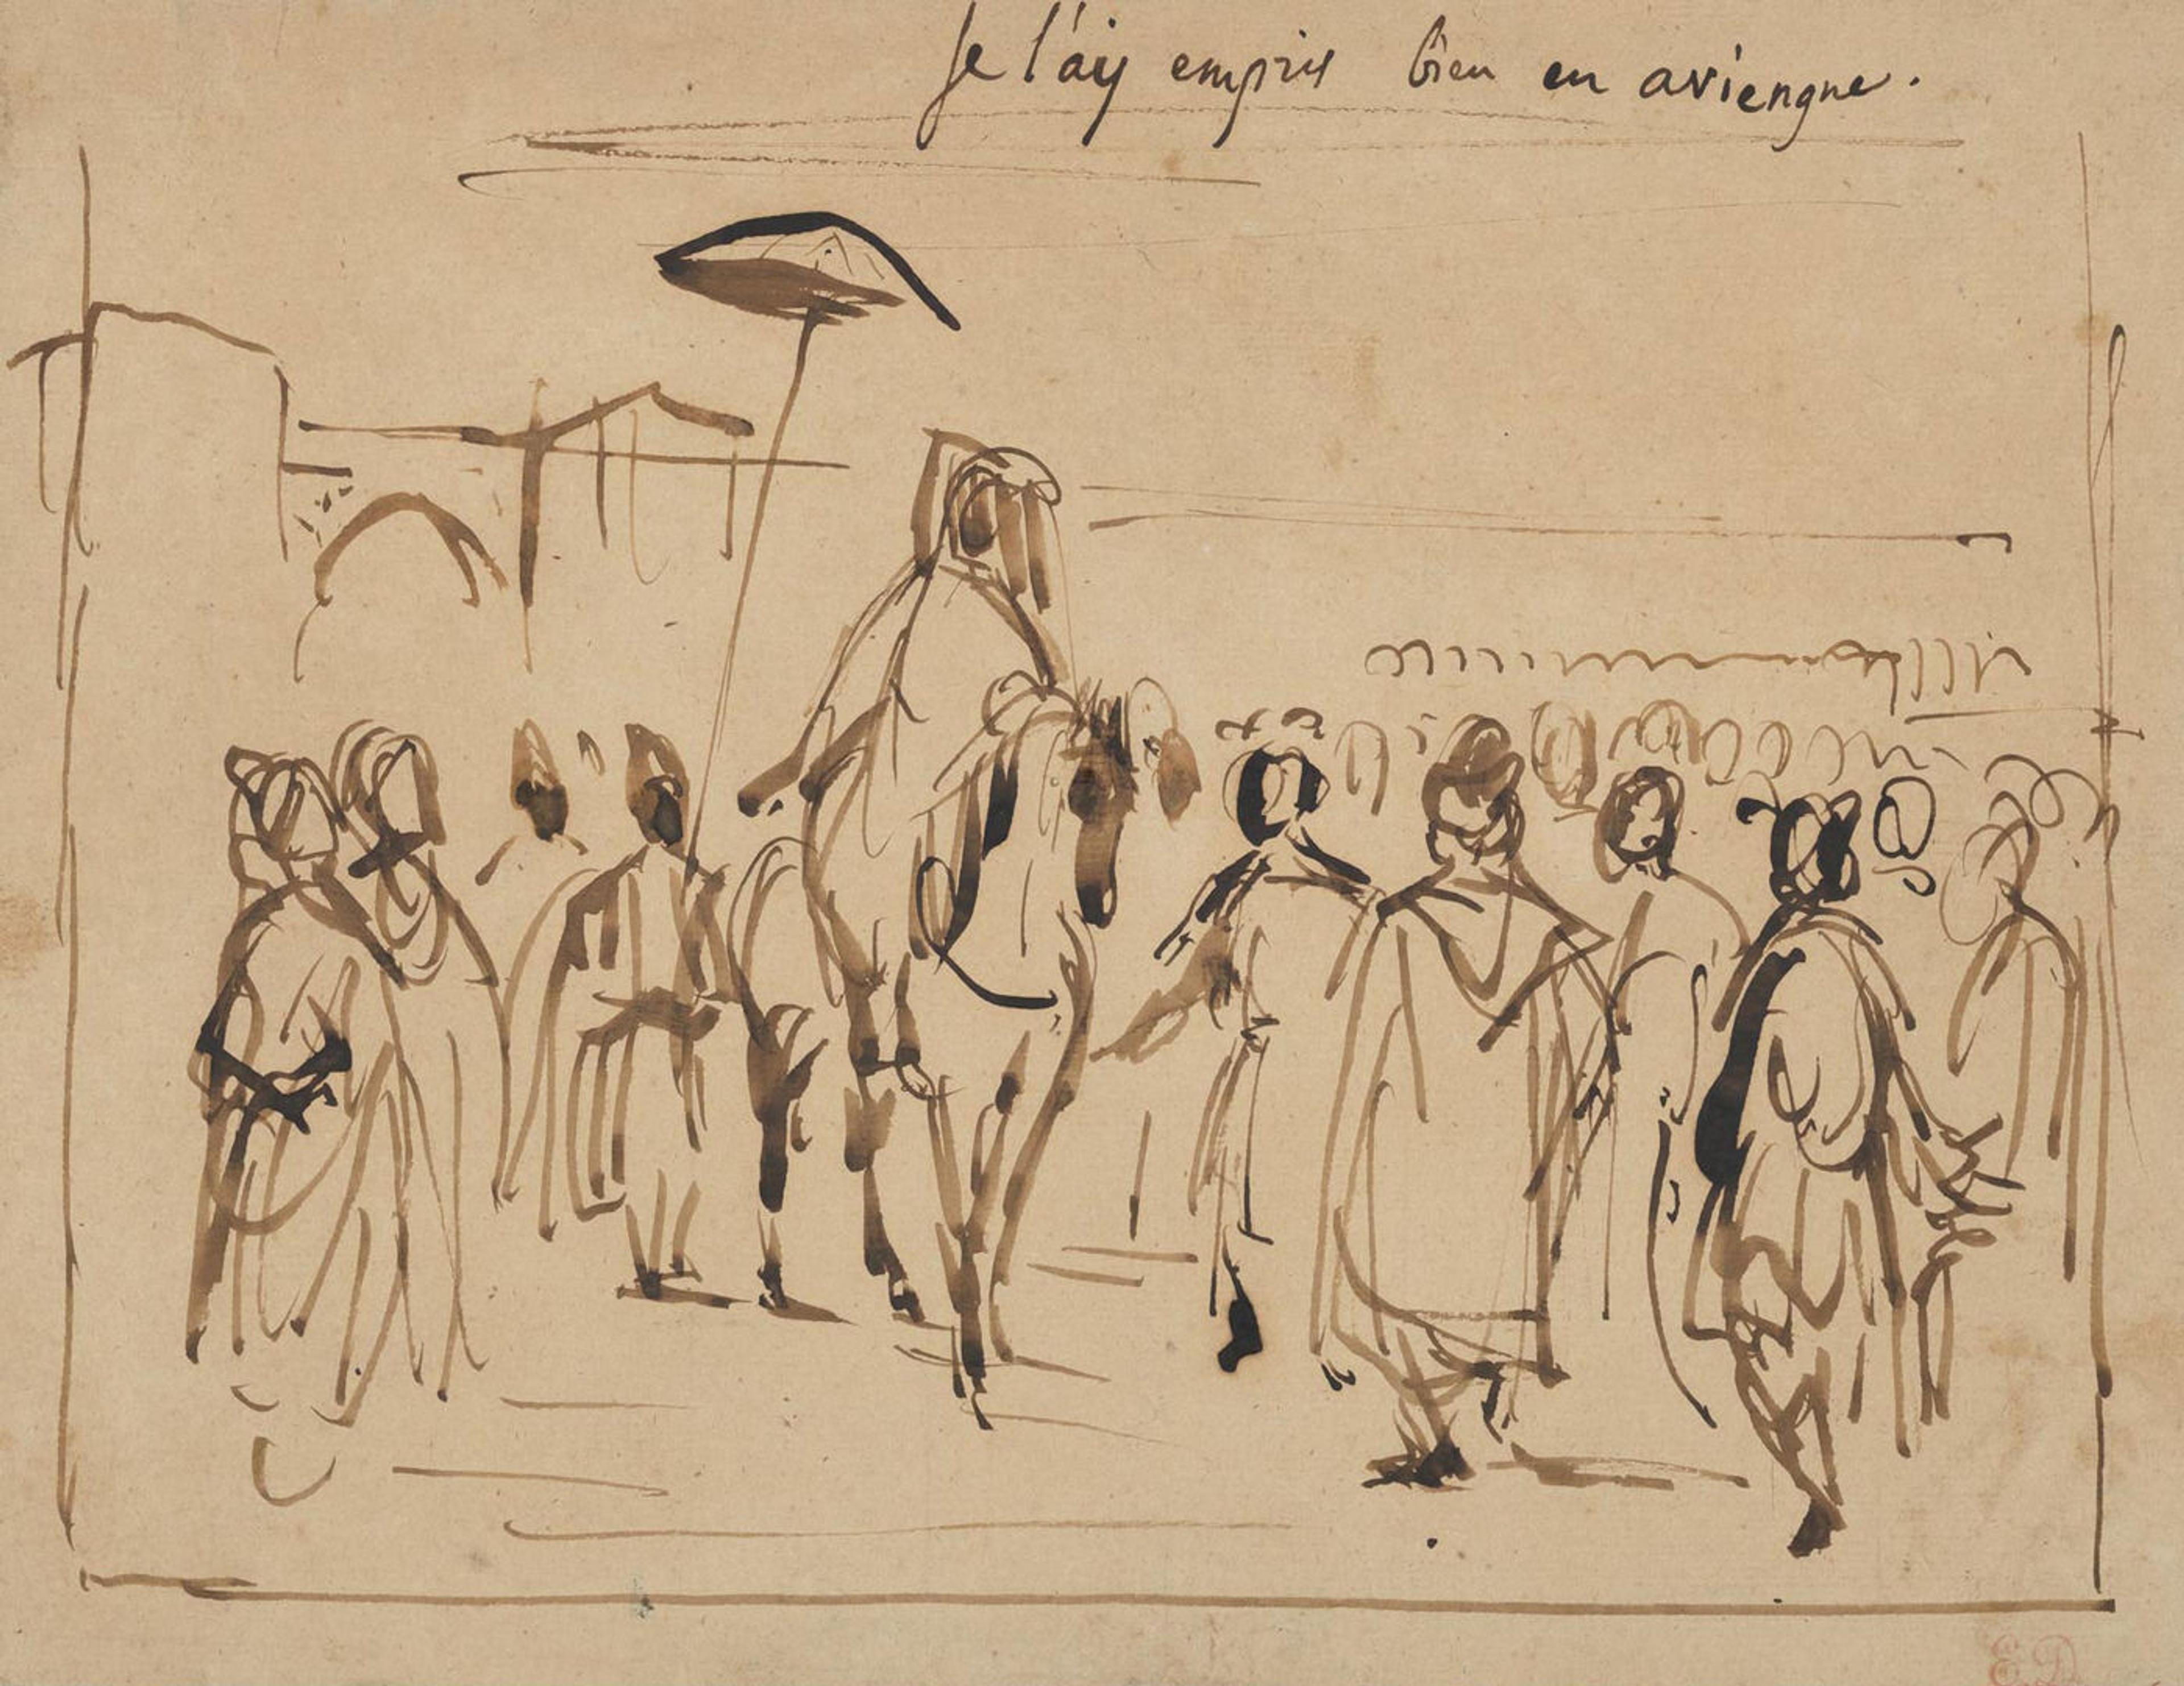 Drawing by Delacroix depicting a royal entourage from Morocco